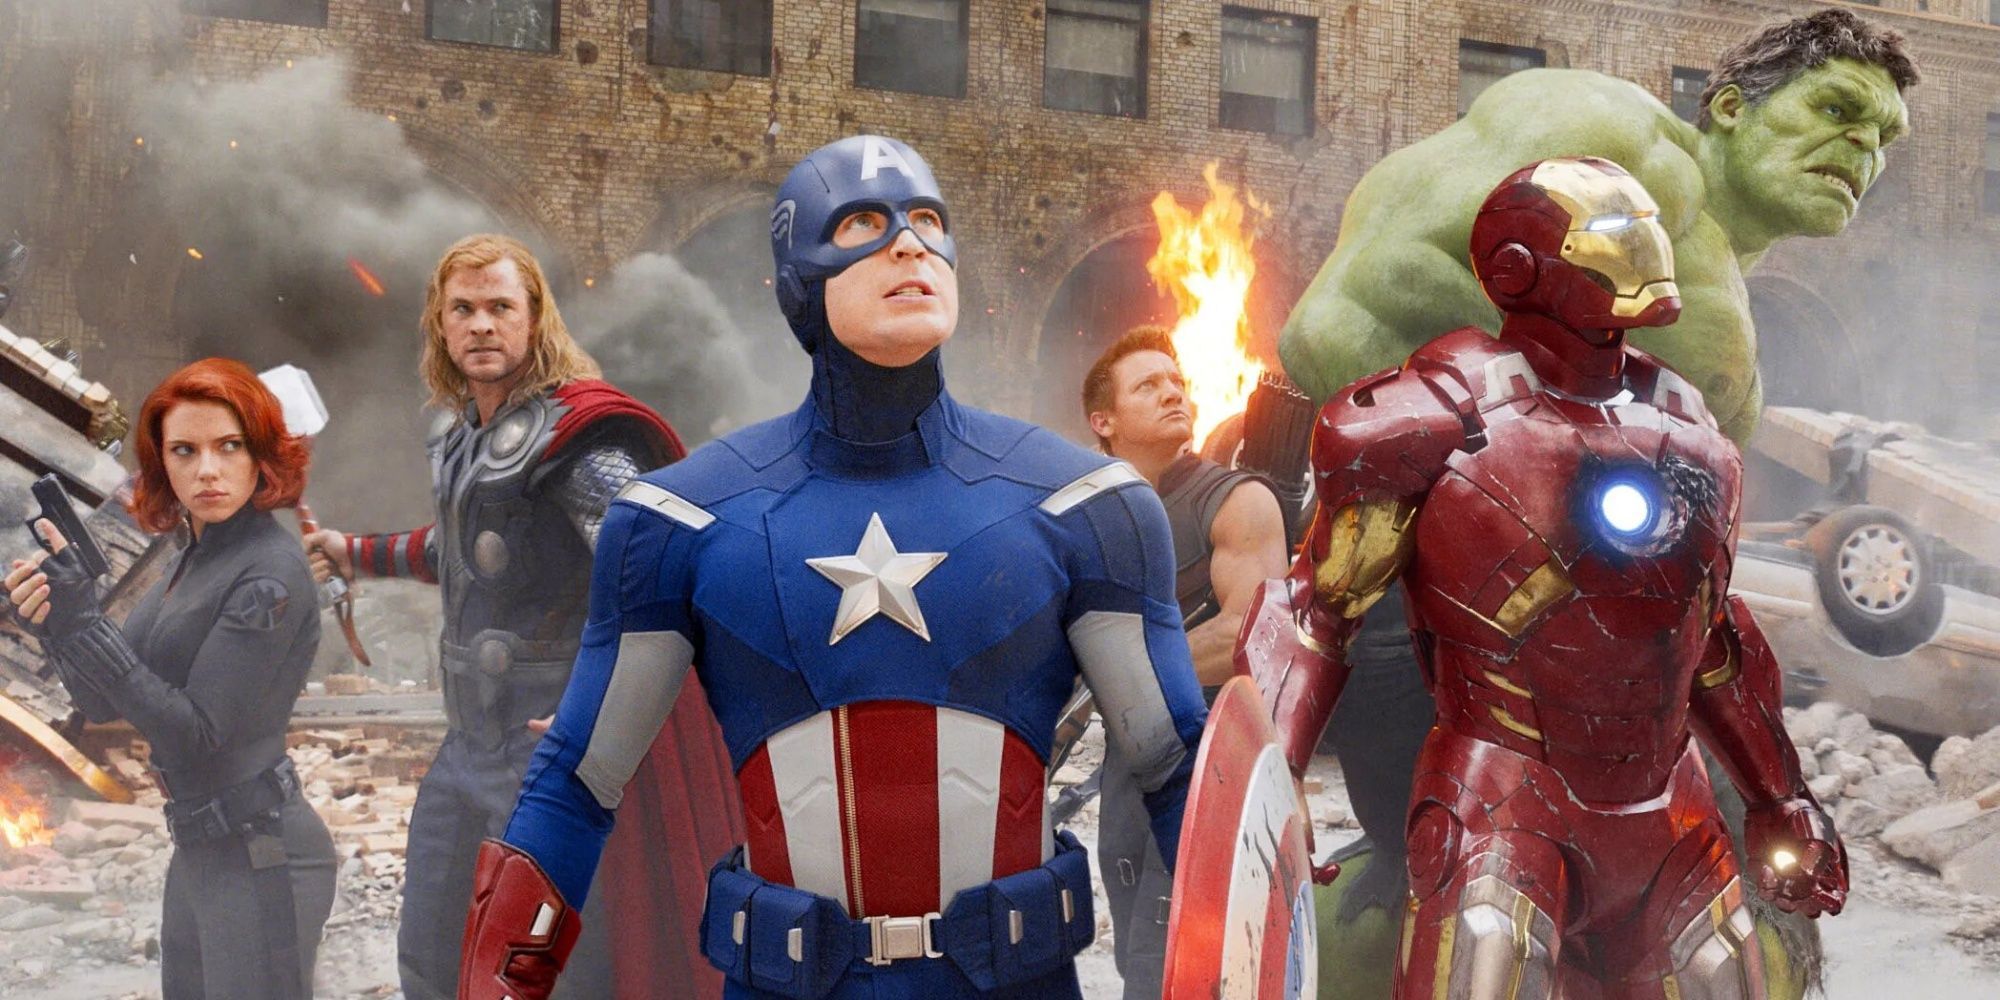 All the Avengers assemble in The Avengers